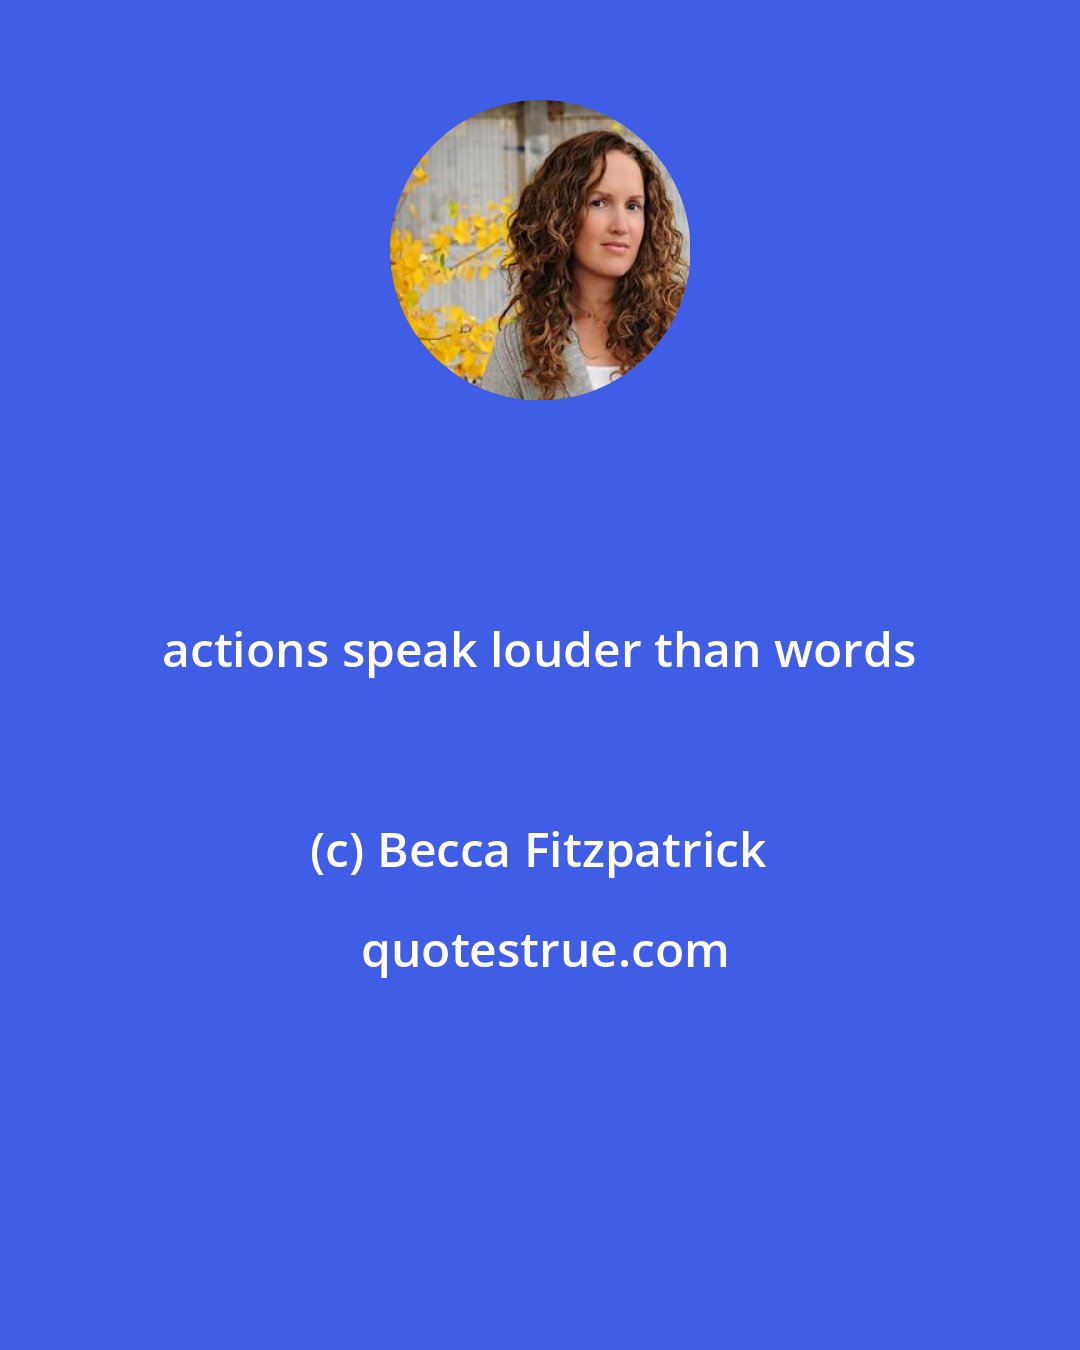 Becca Fitzpatrick: actions speak louder than words